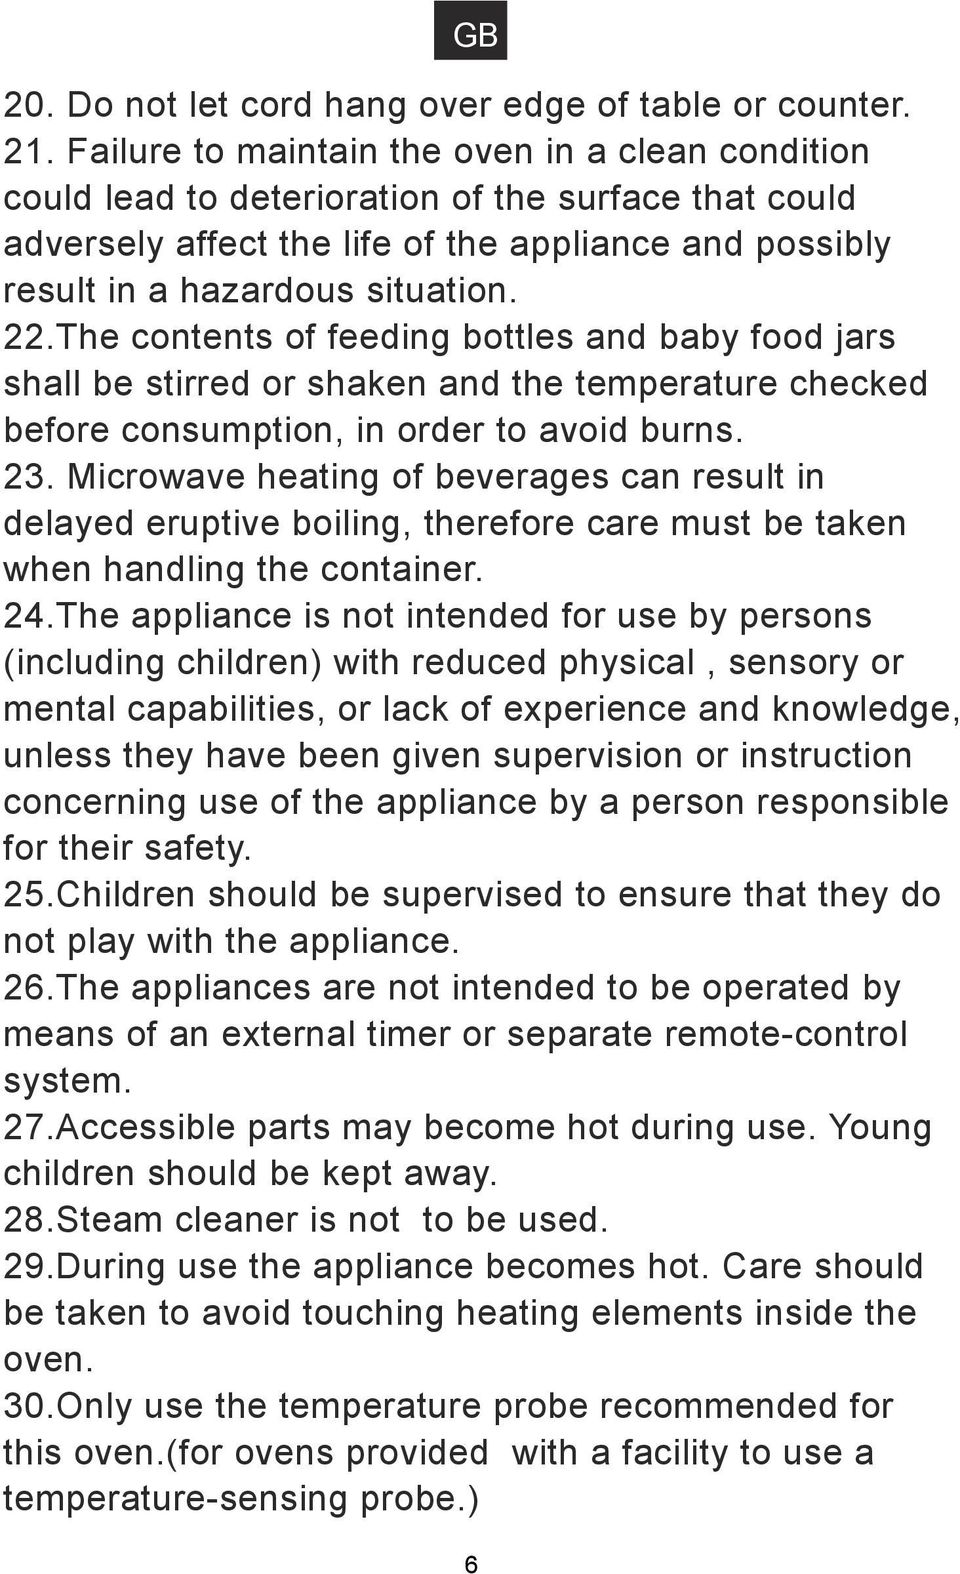 The contents of feeding bottles and baby food jars shall be stirred or shaken and the temperature checked before consumption, in order to avoid burns. 23.